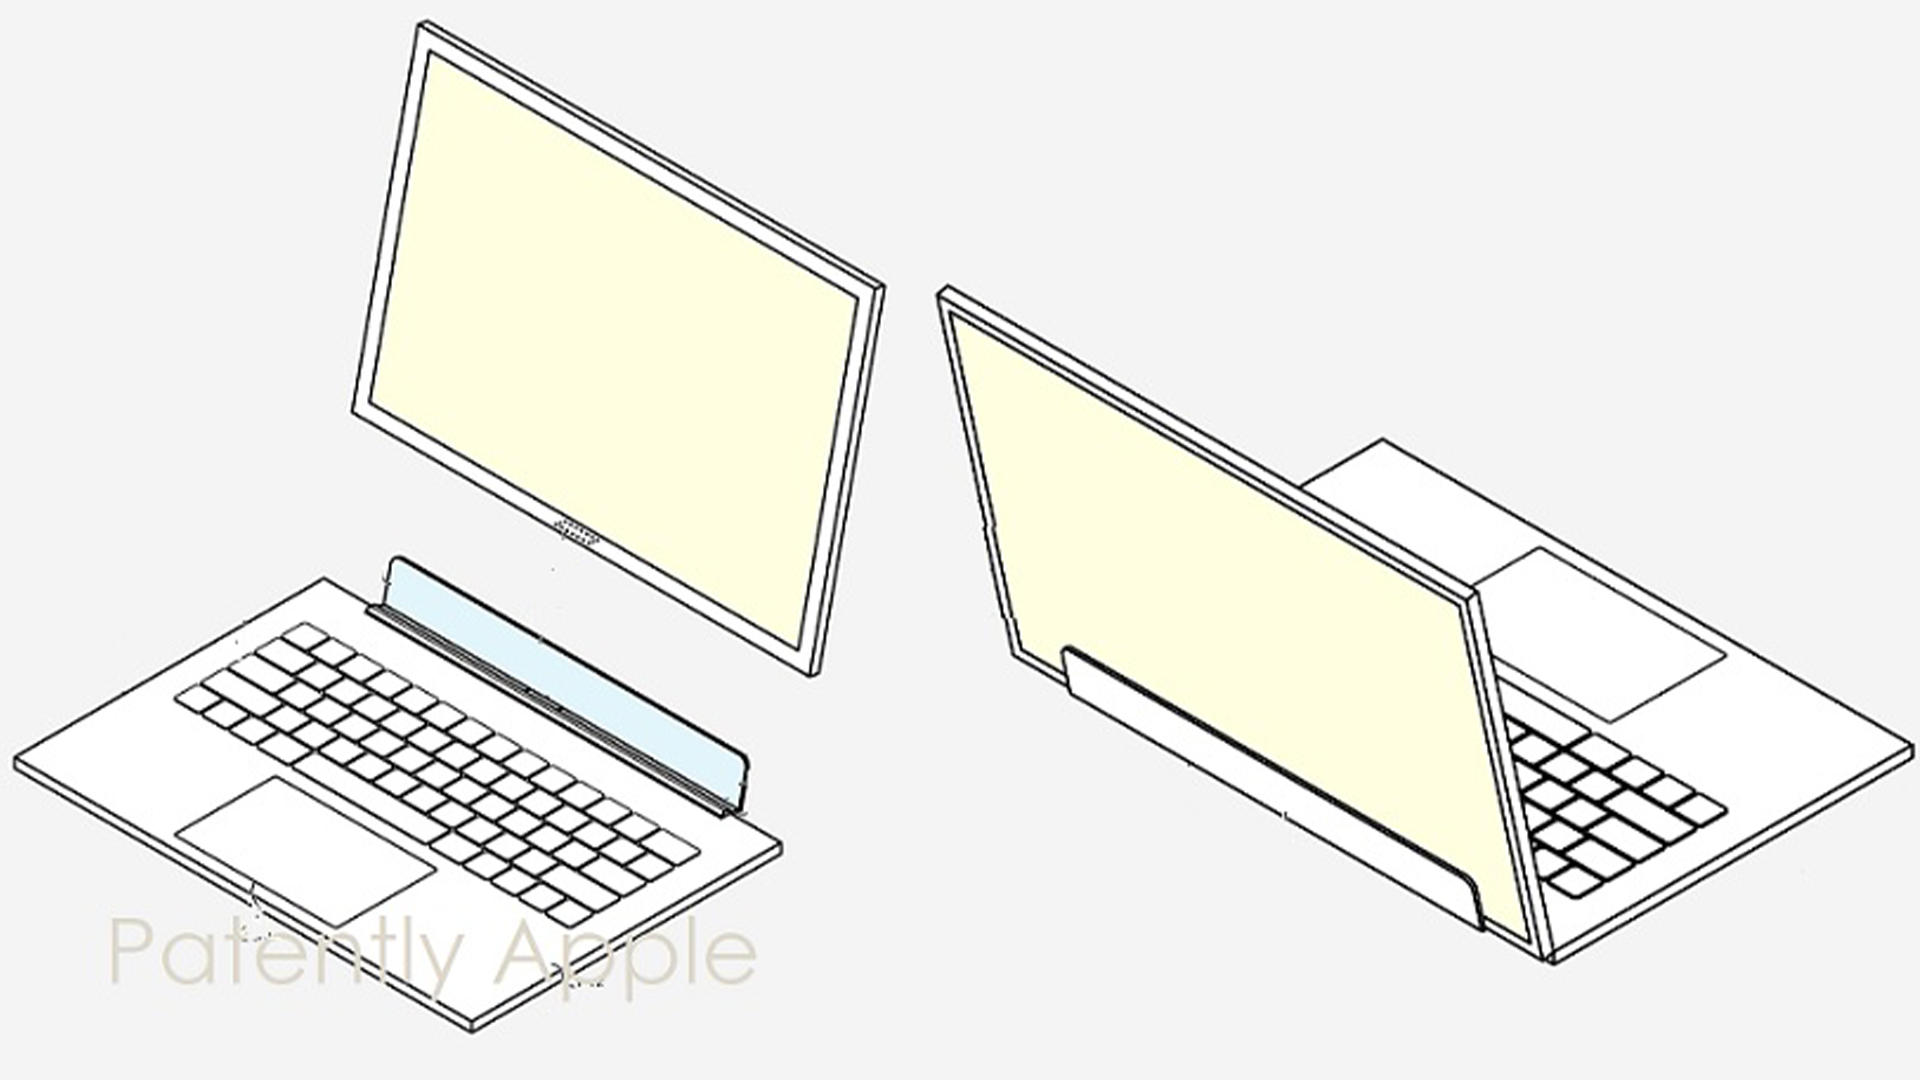 Patent showcasing a macOS mode on iPad